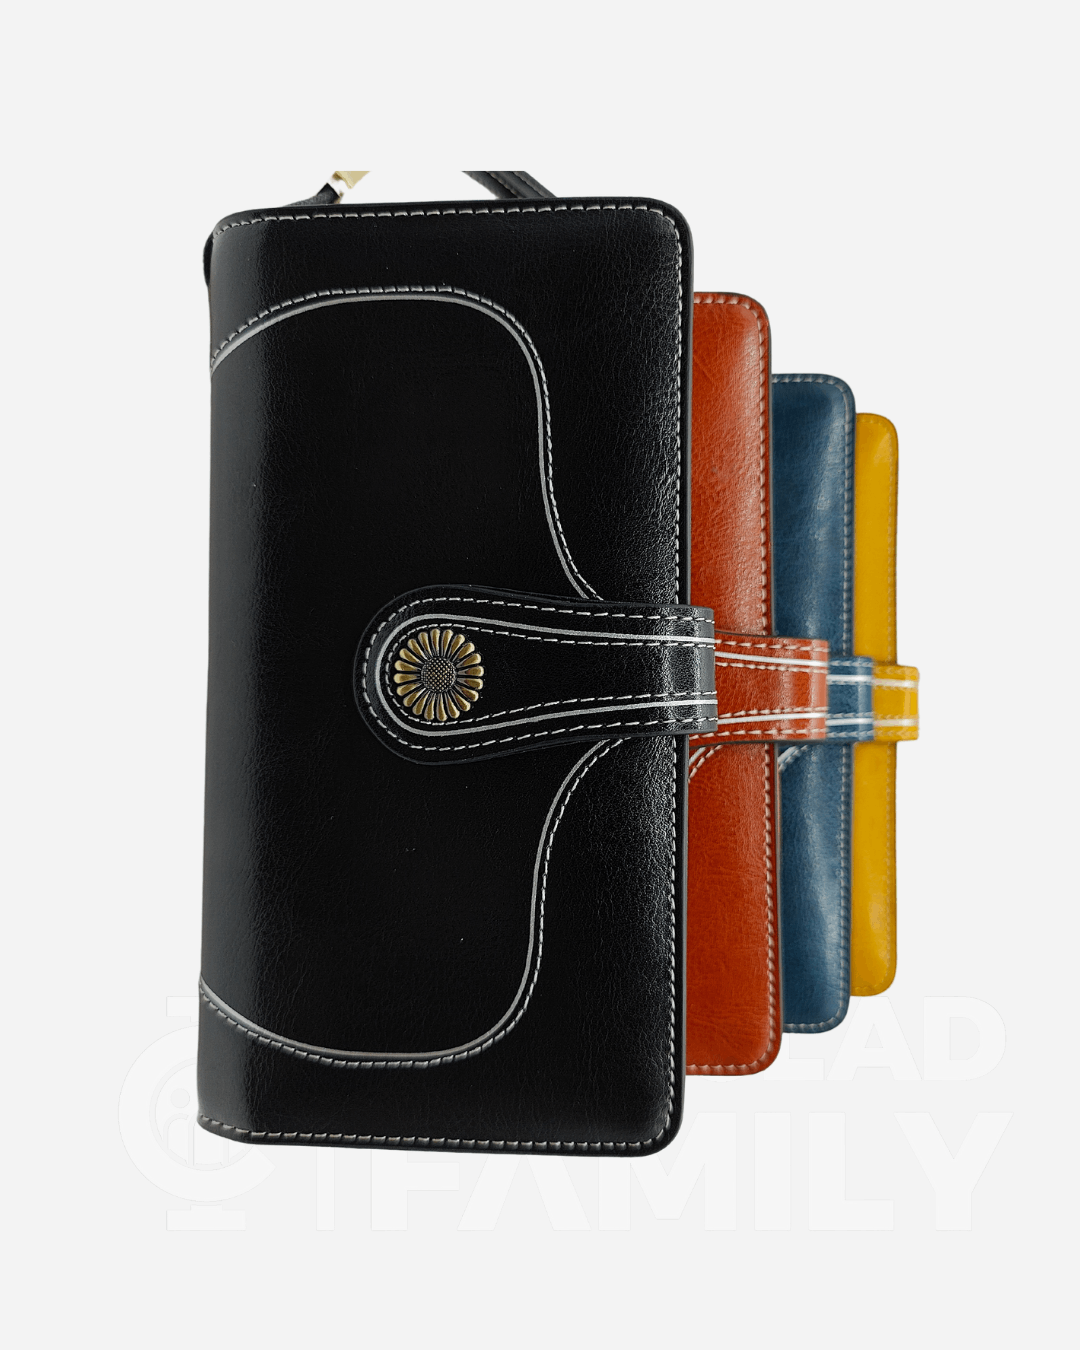 Four different colored RFID blocking leather wallets with zippers